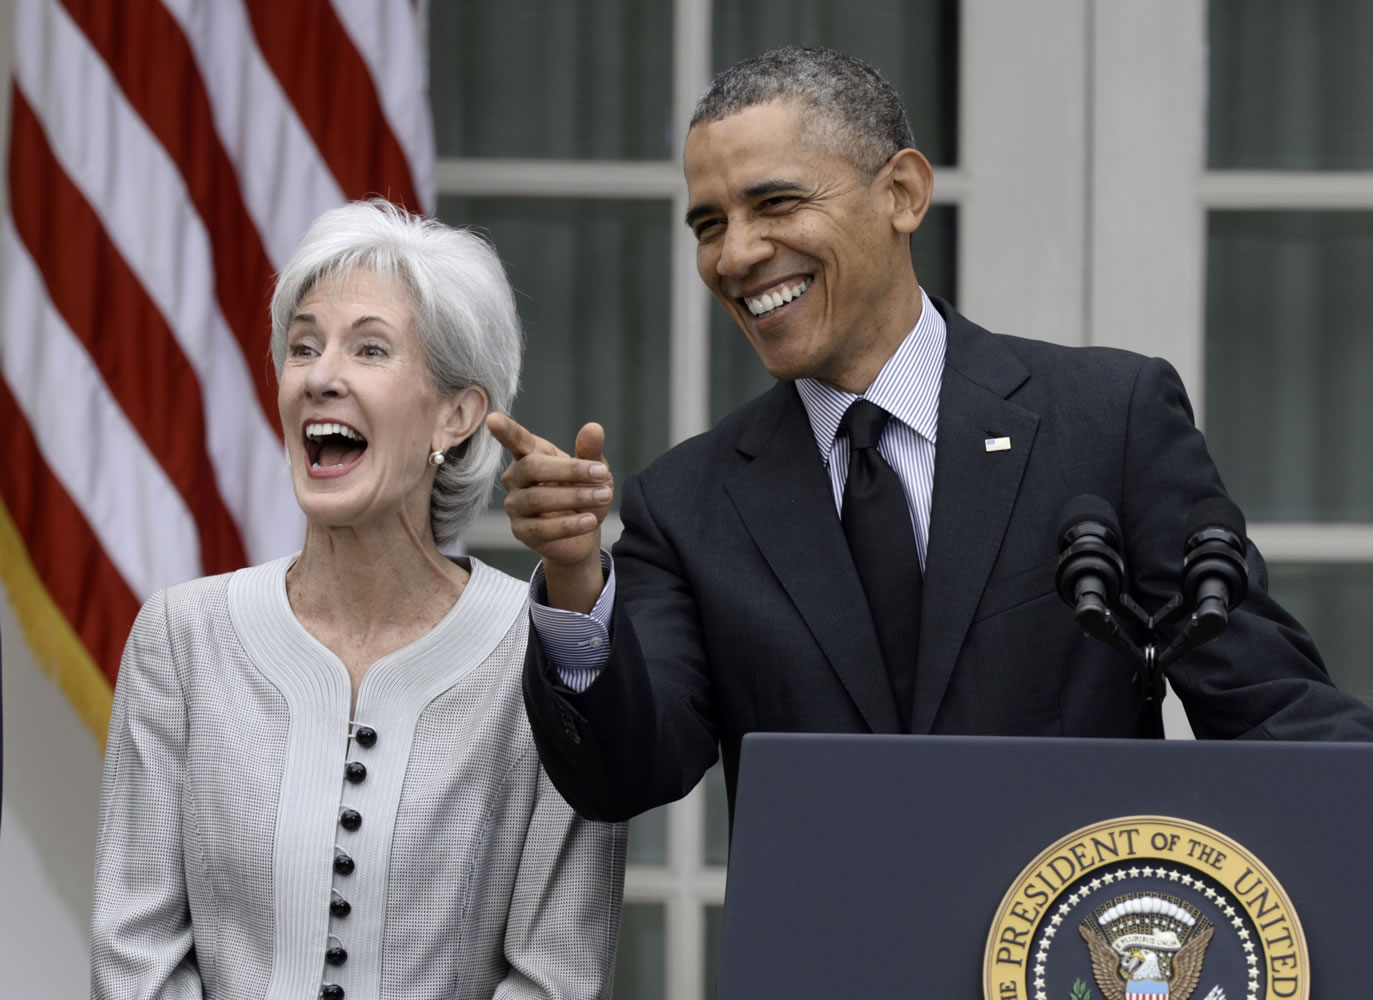 President Barack Obama shares a laugh with outgoing Health and Human Services Secretary Kathleen Sebelius on Friday in the Rose Garden of the White House in Washington to announce he would nominate current Budget director Sylvia Mathews Burwell to replace Sebelius.